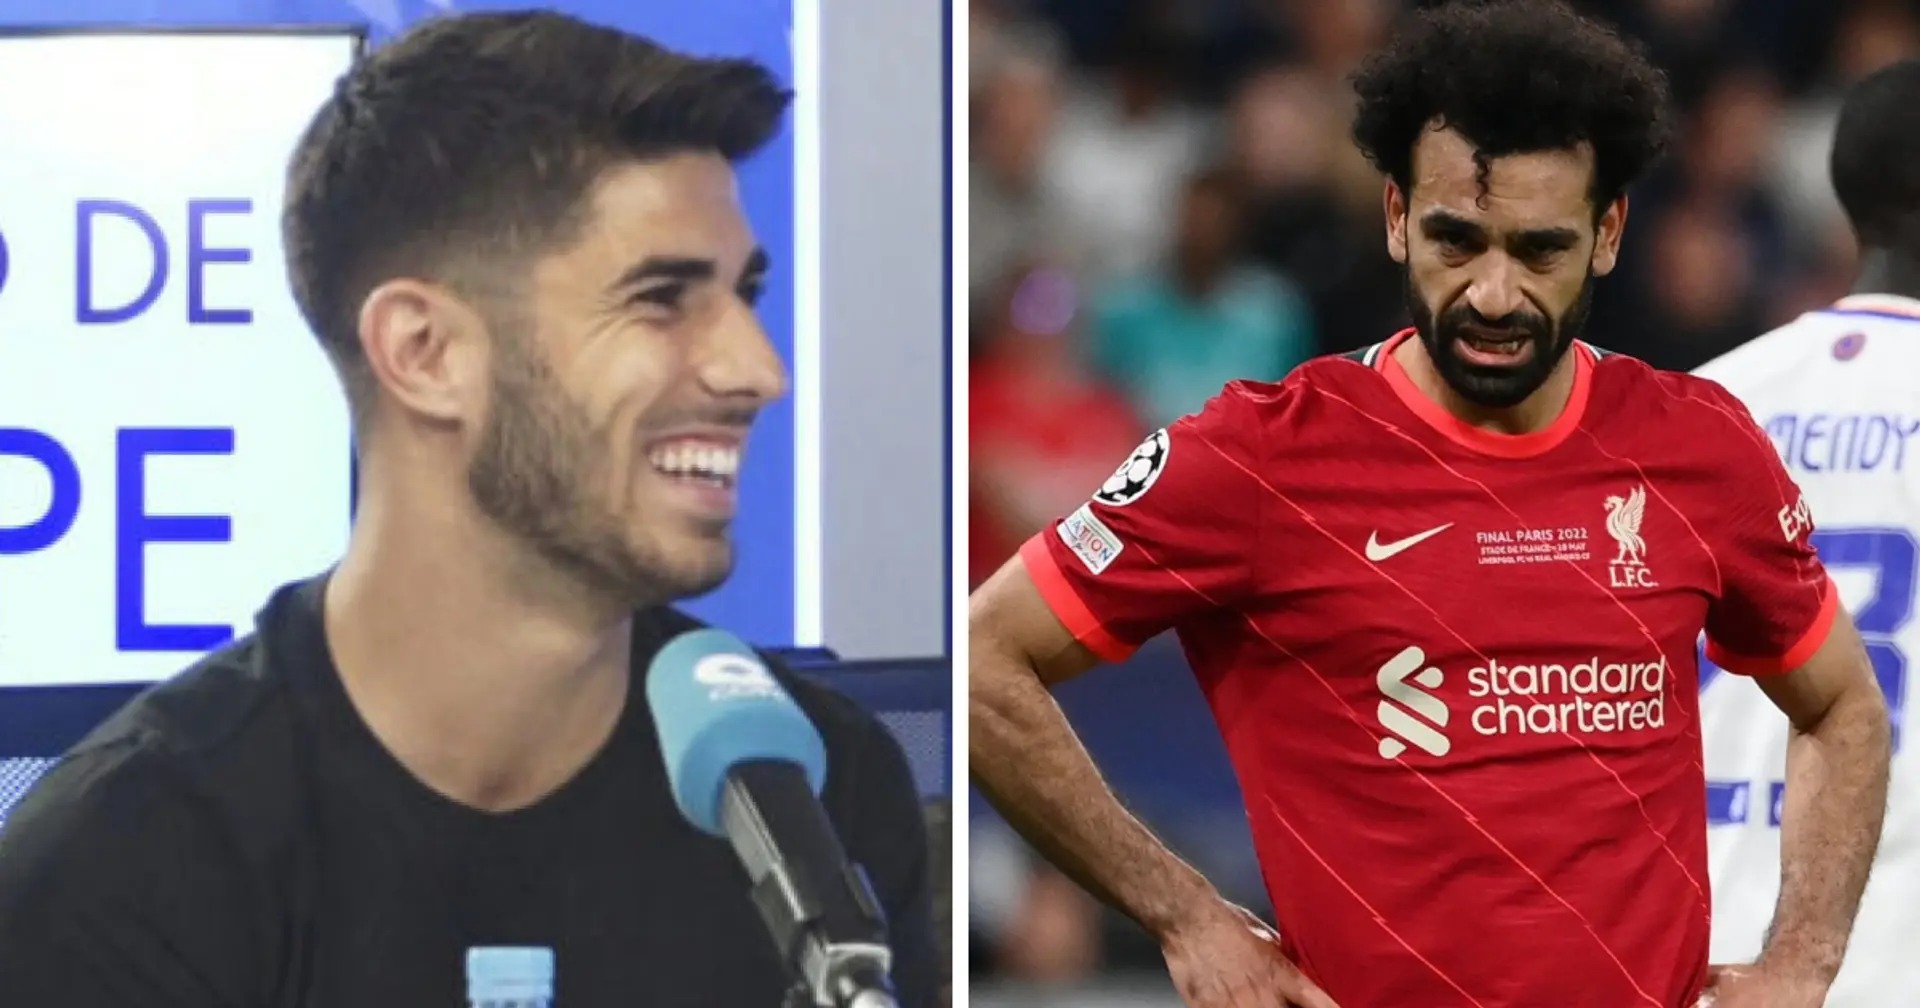 Marco Asensio linked with Liverpool as Salah's replacement